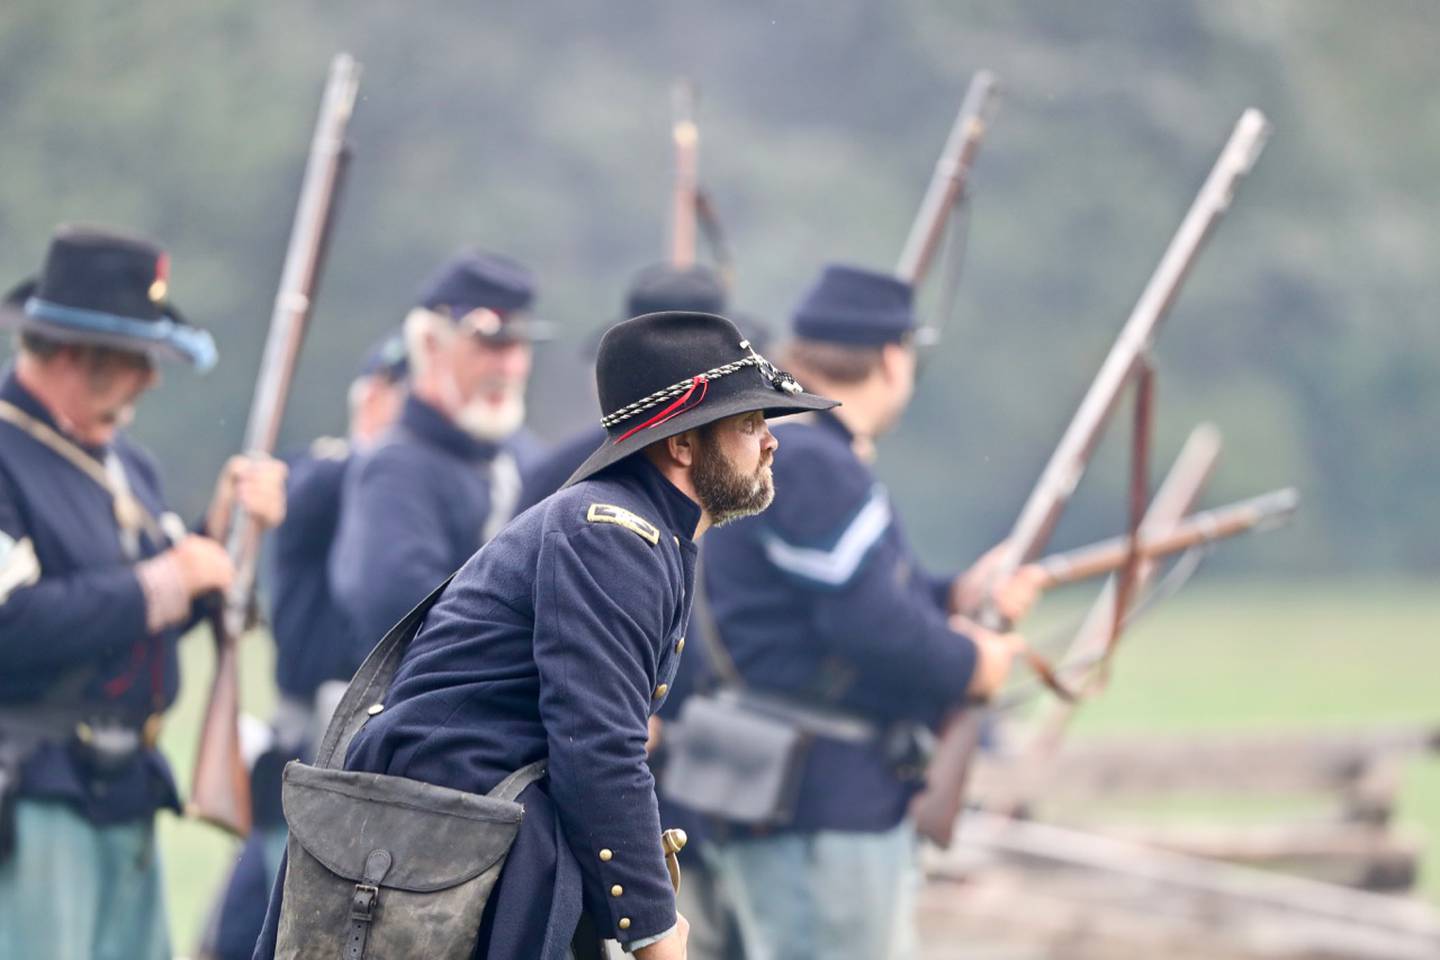 Union Civil War re-enactor soldiers take part in a battle scene during Princeton's Shadow of the Blue and Gray event on Saturday, Oct. 9, 2021.